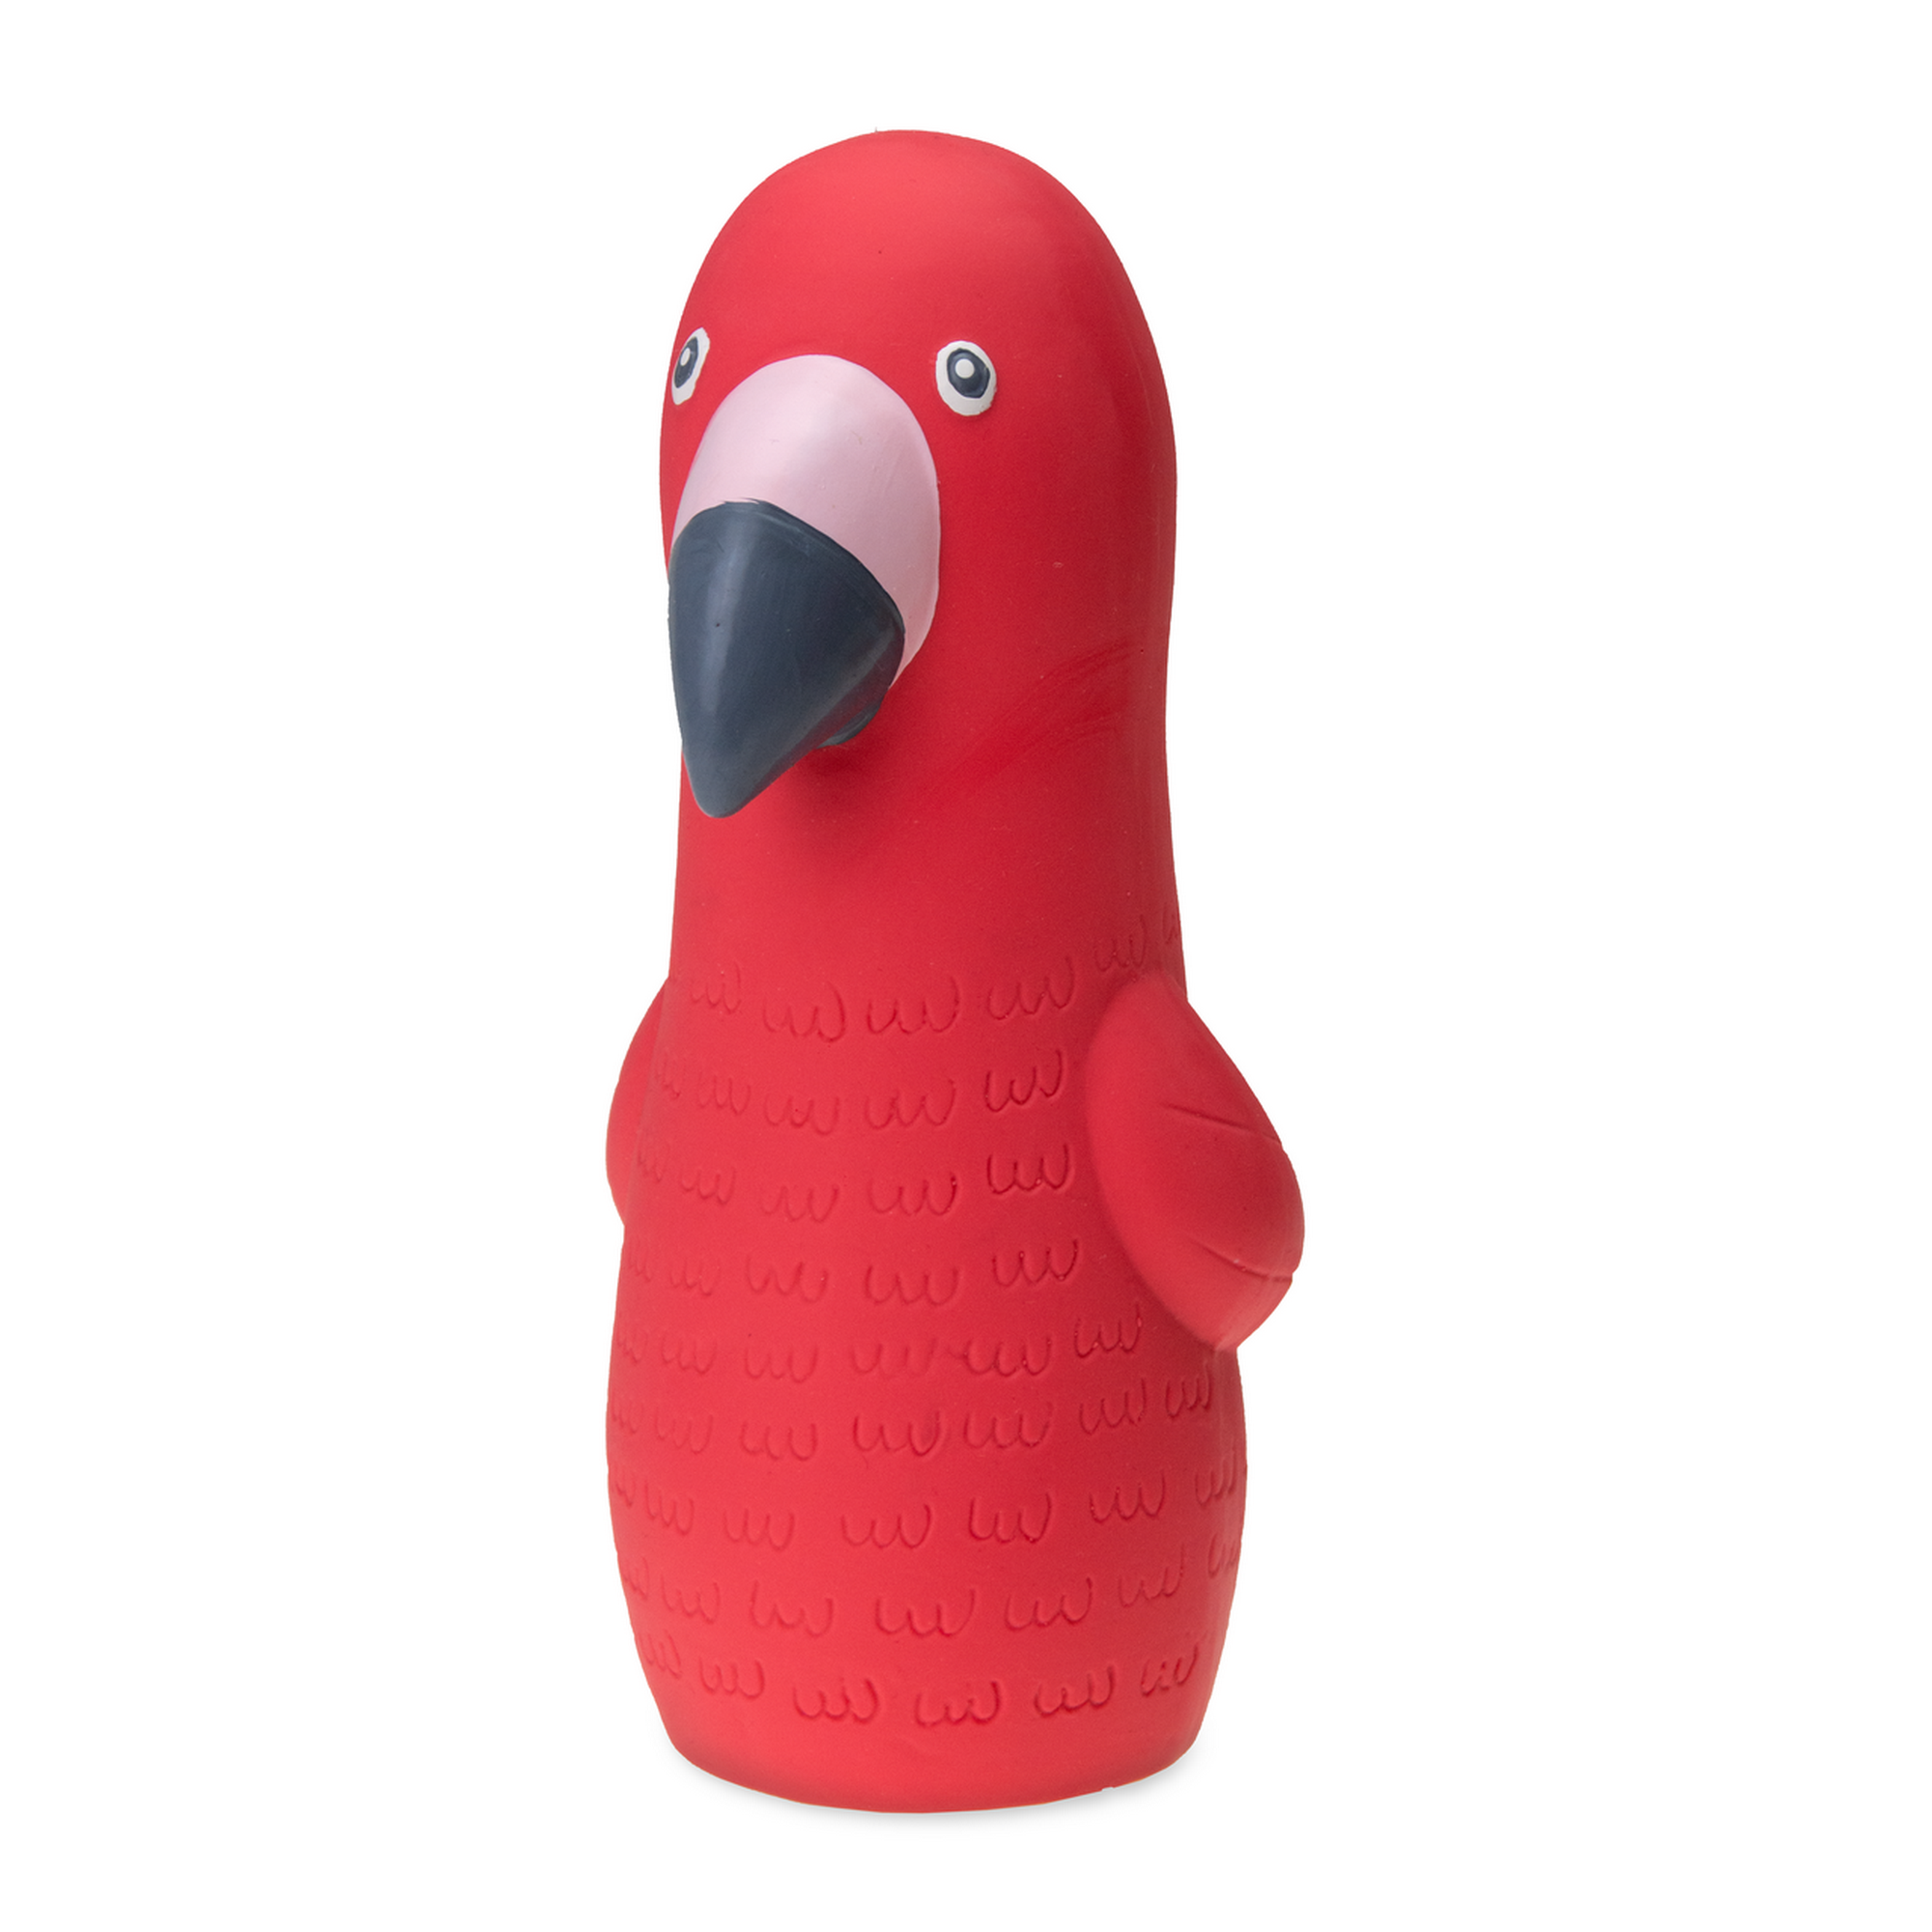 Kauspielzeug Vogel rot Latex 19,5 cm + product picture